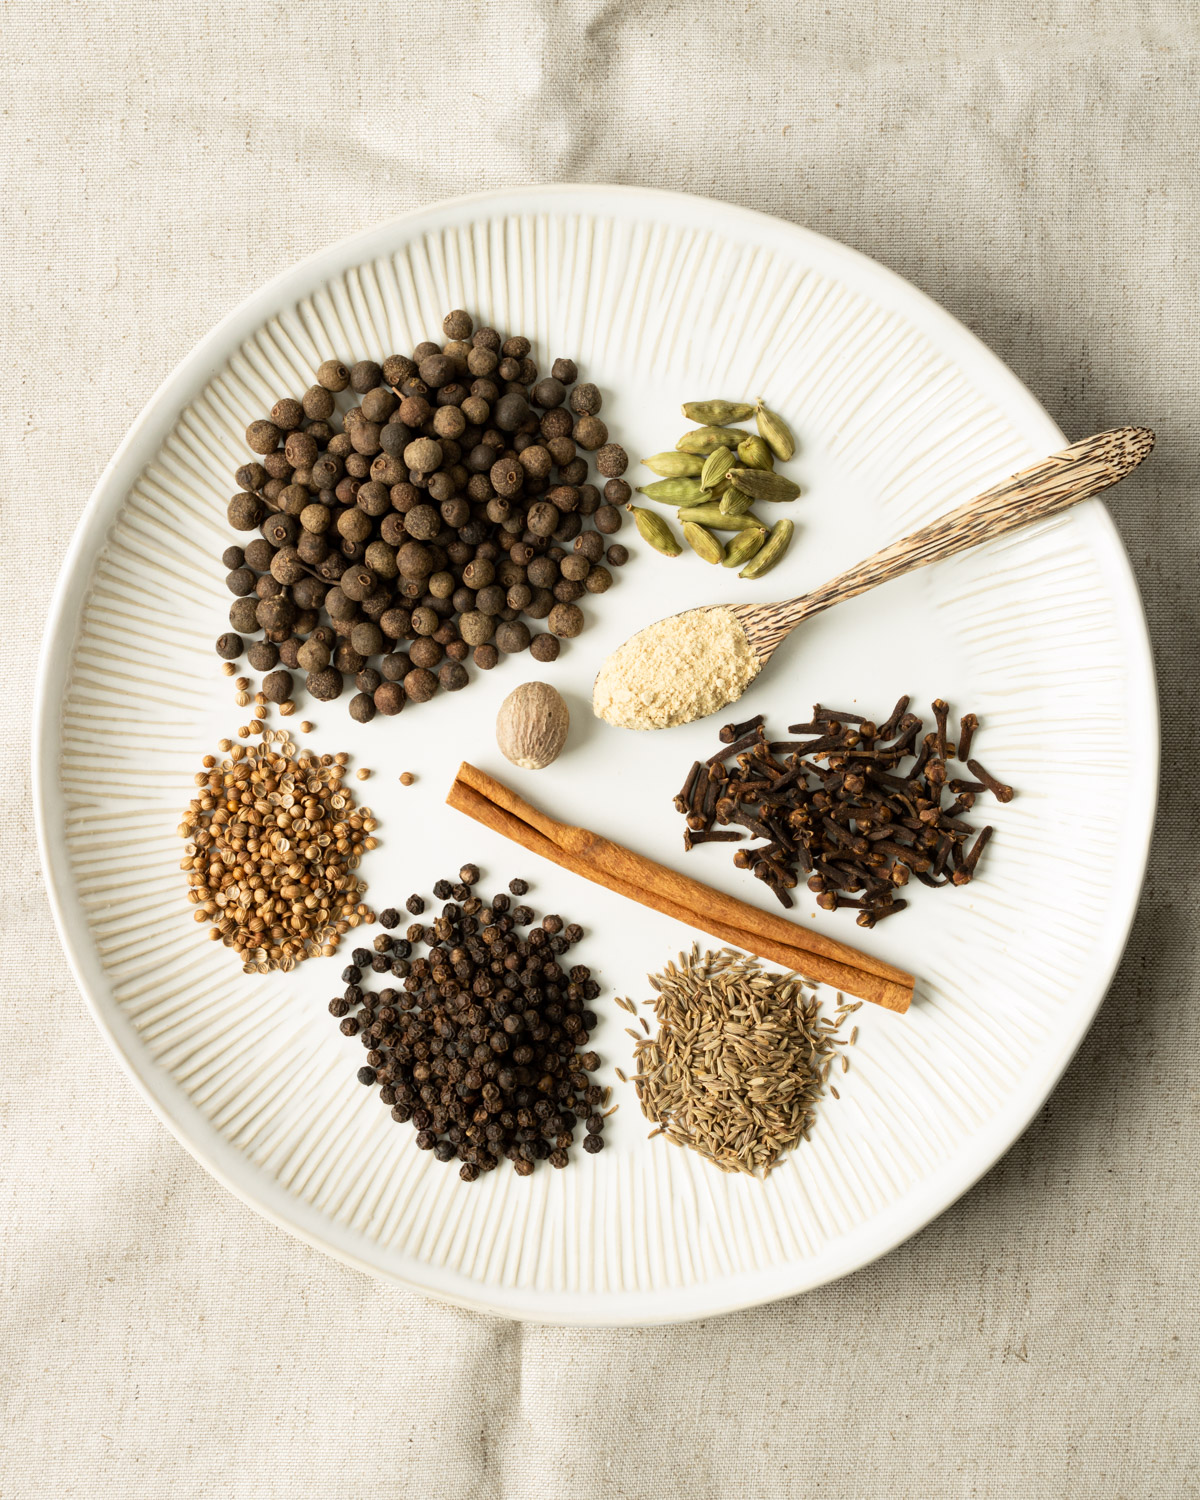 a variety of whole spices on a white plate for Lebanese 7 spice.